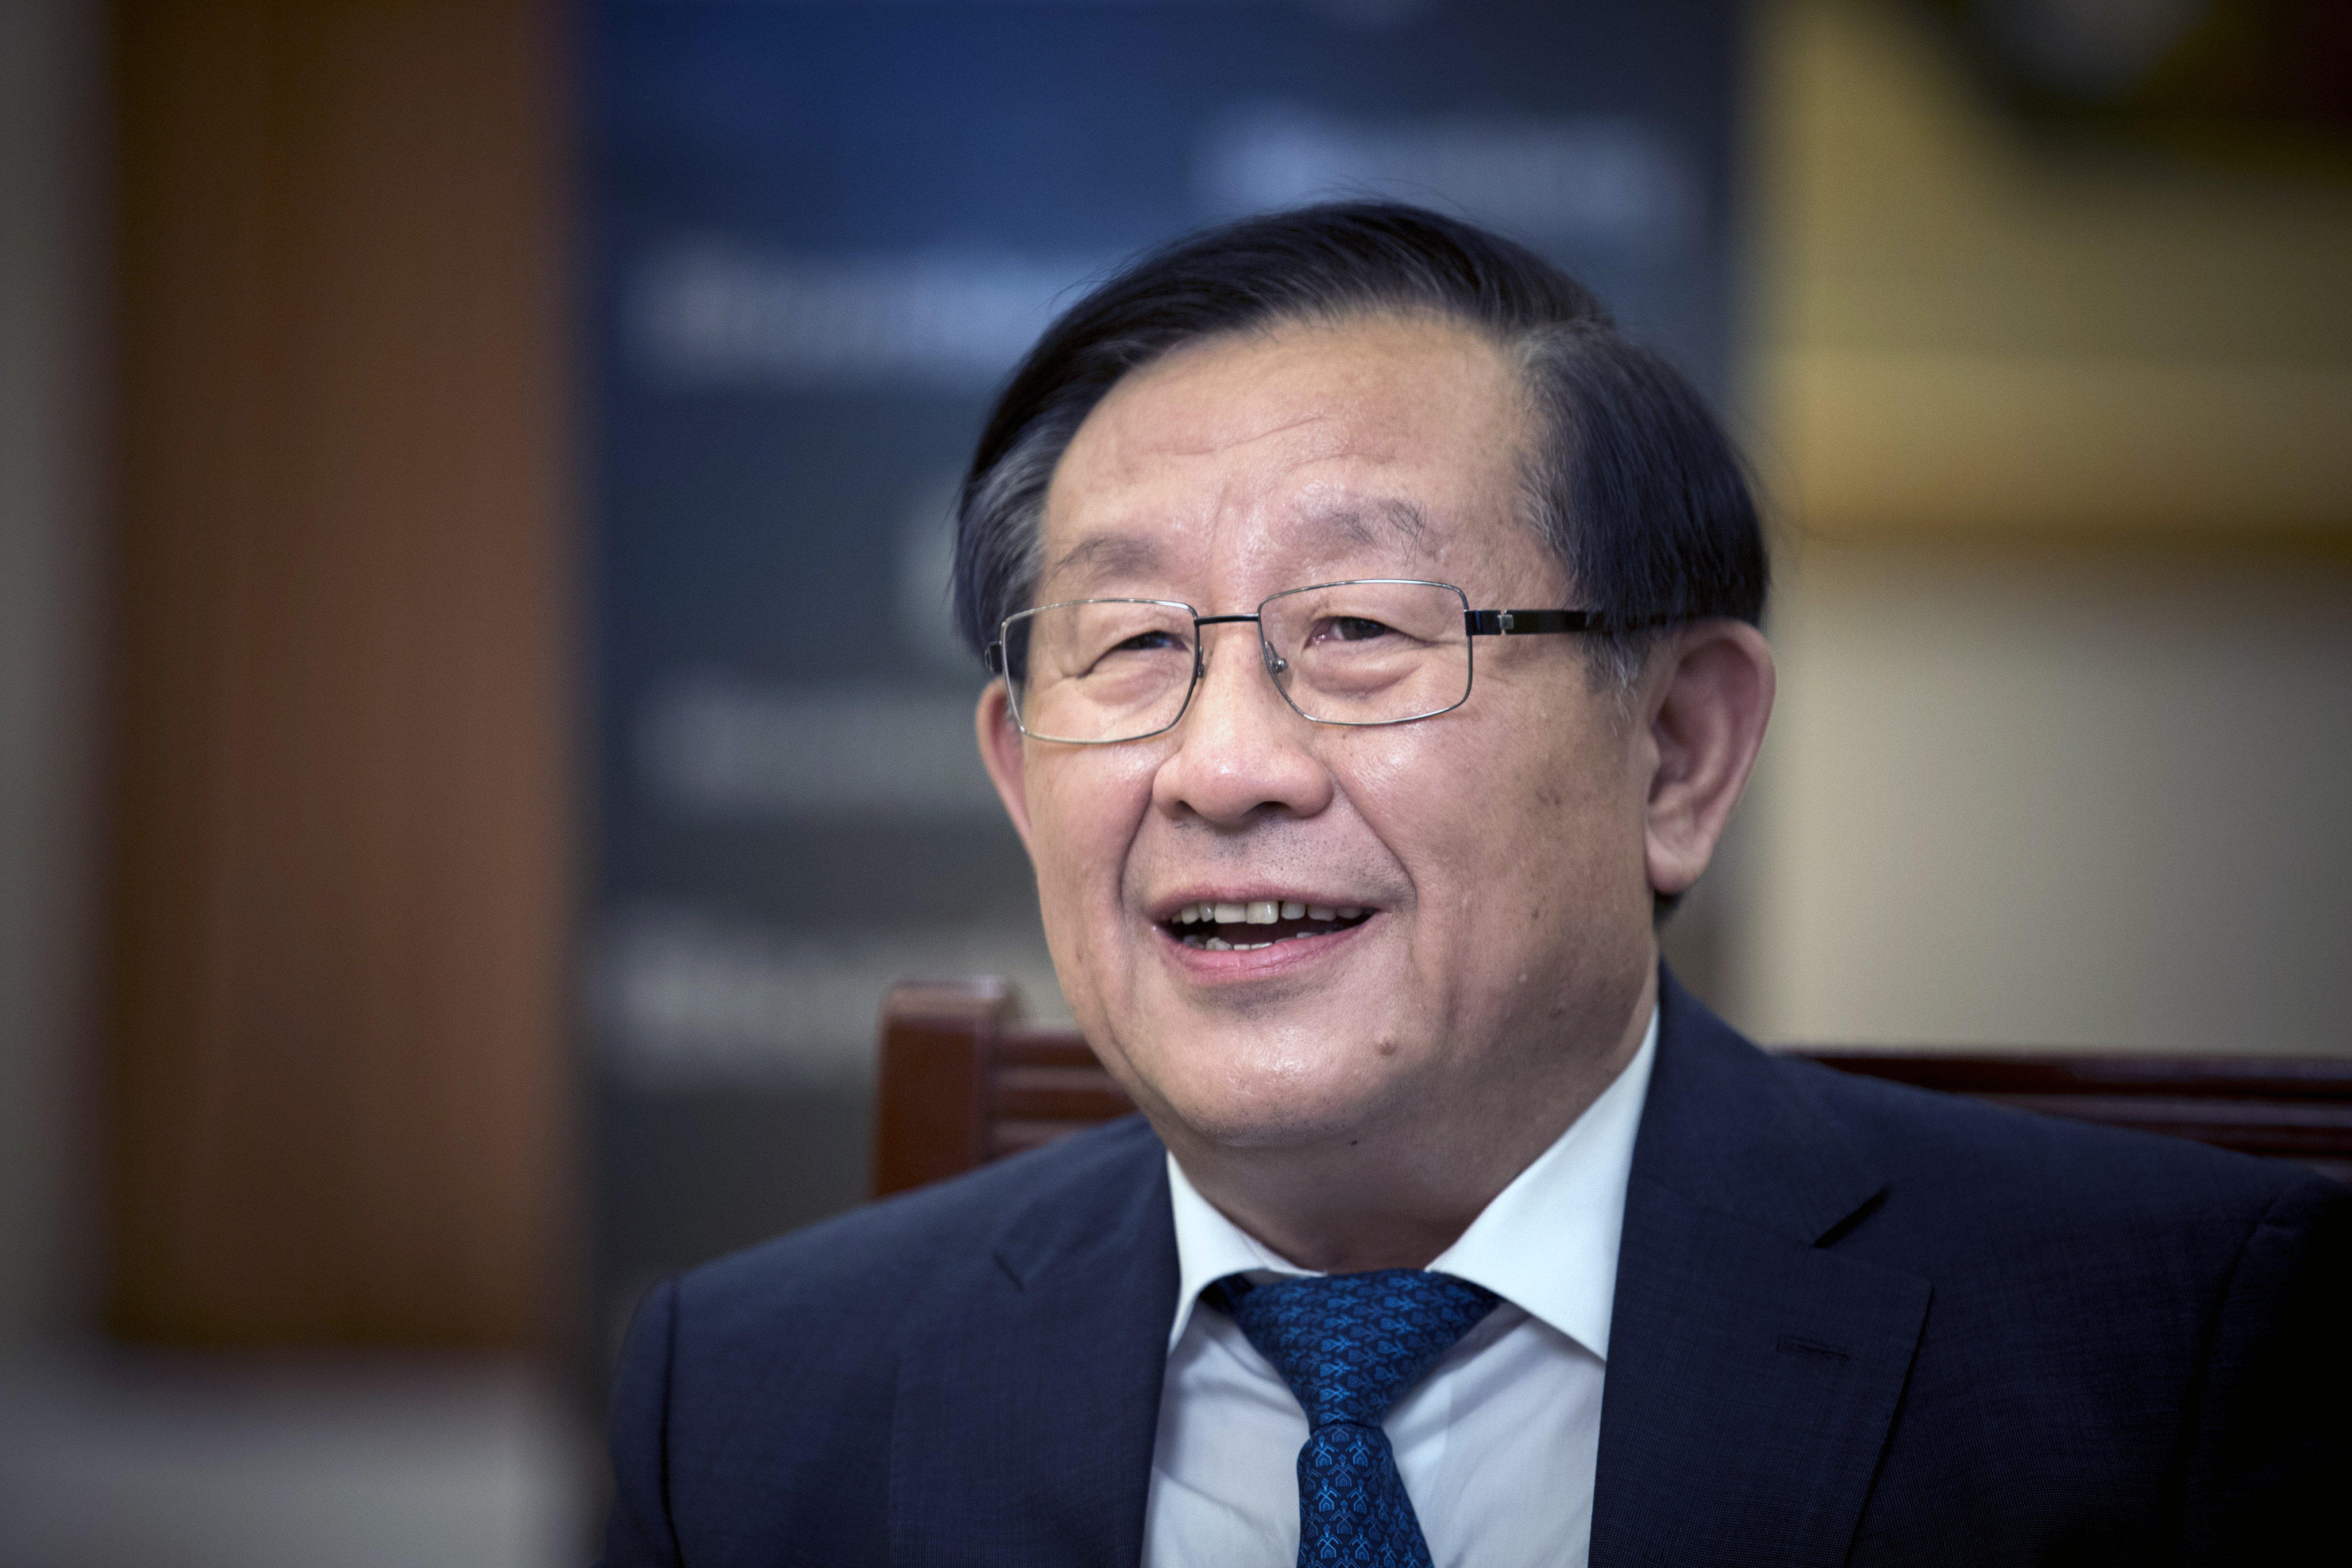 China will send its former science and technology minister Wan Gang as its delegate to the state funeral of former Japanese prime minister Shinzo Abe on September 27. Photo: Bloomberg